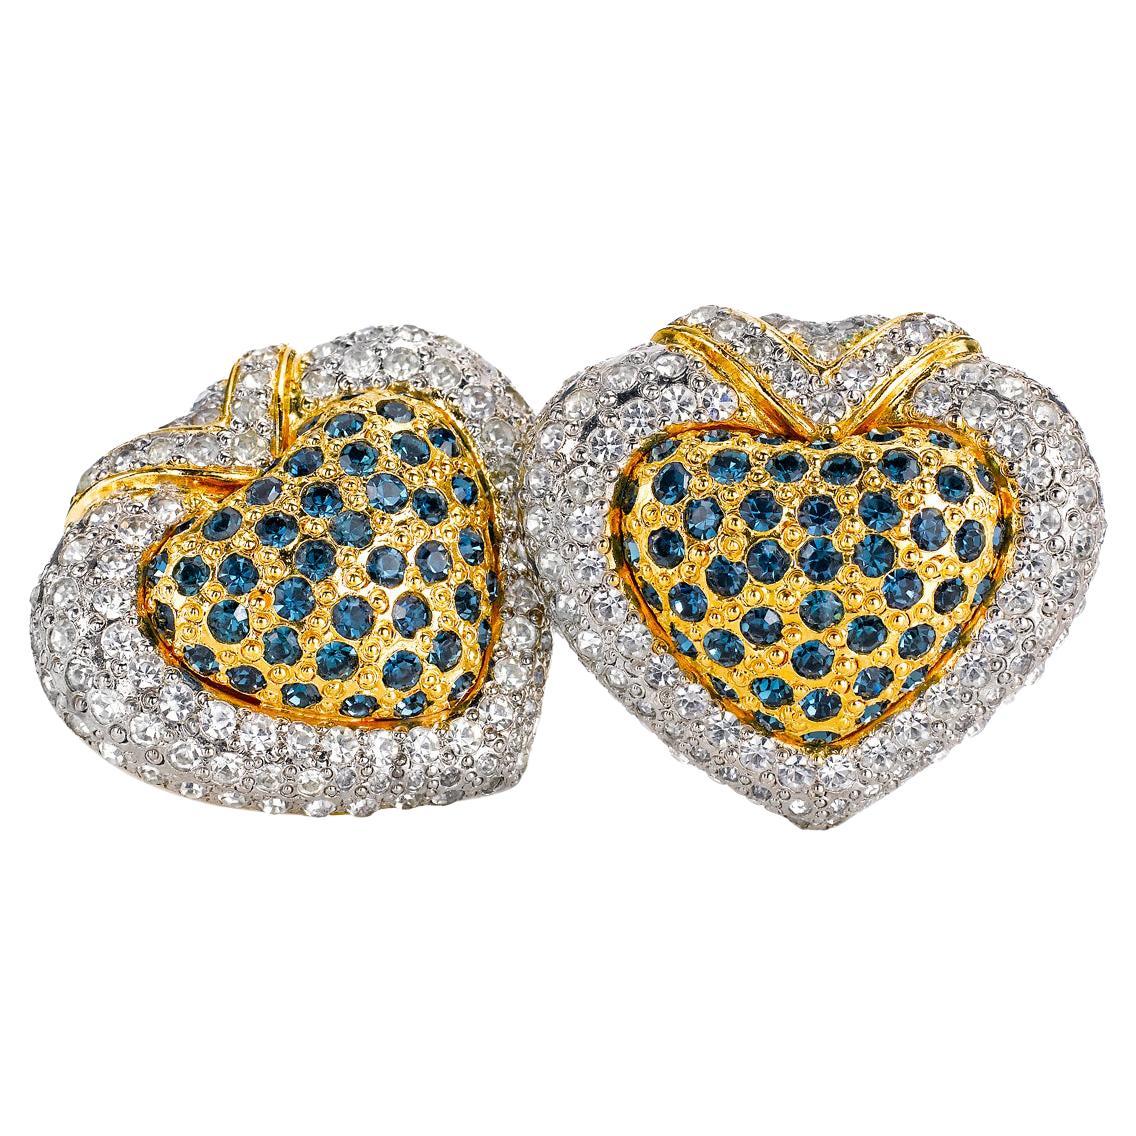 Vintage Valentino Gold Tone with Sapphire and Rhinestone Earrings, Circa 1980s